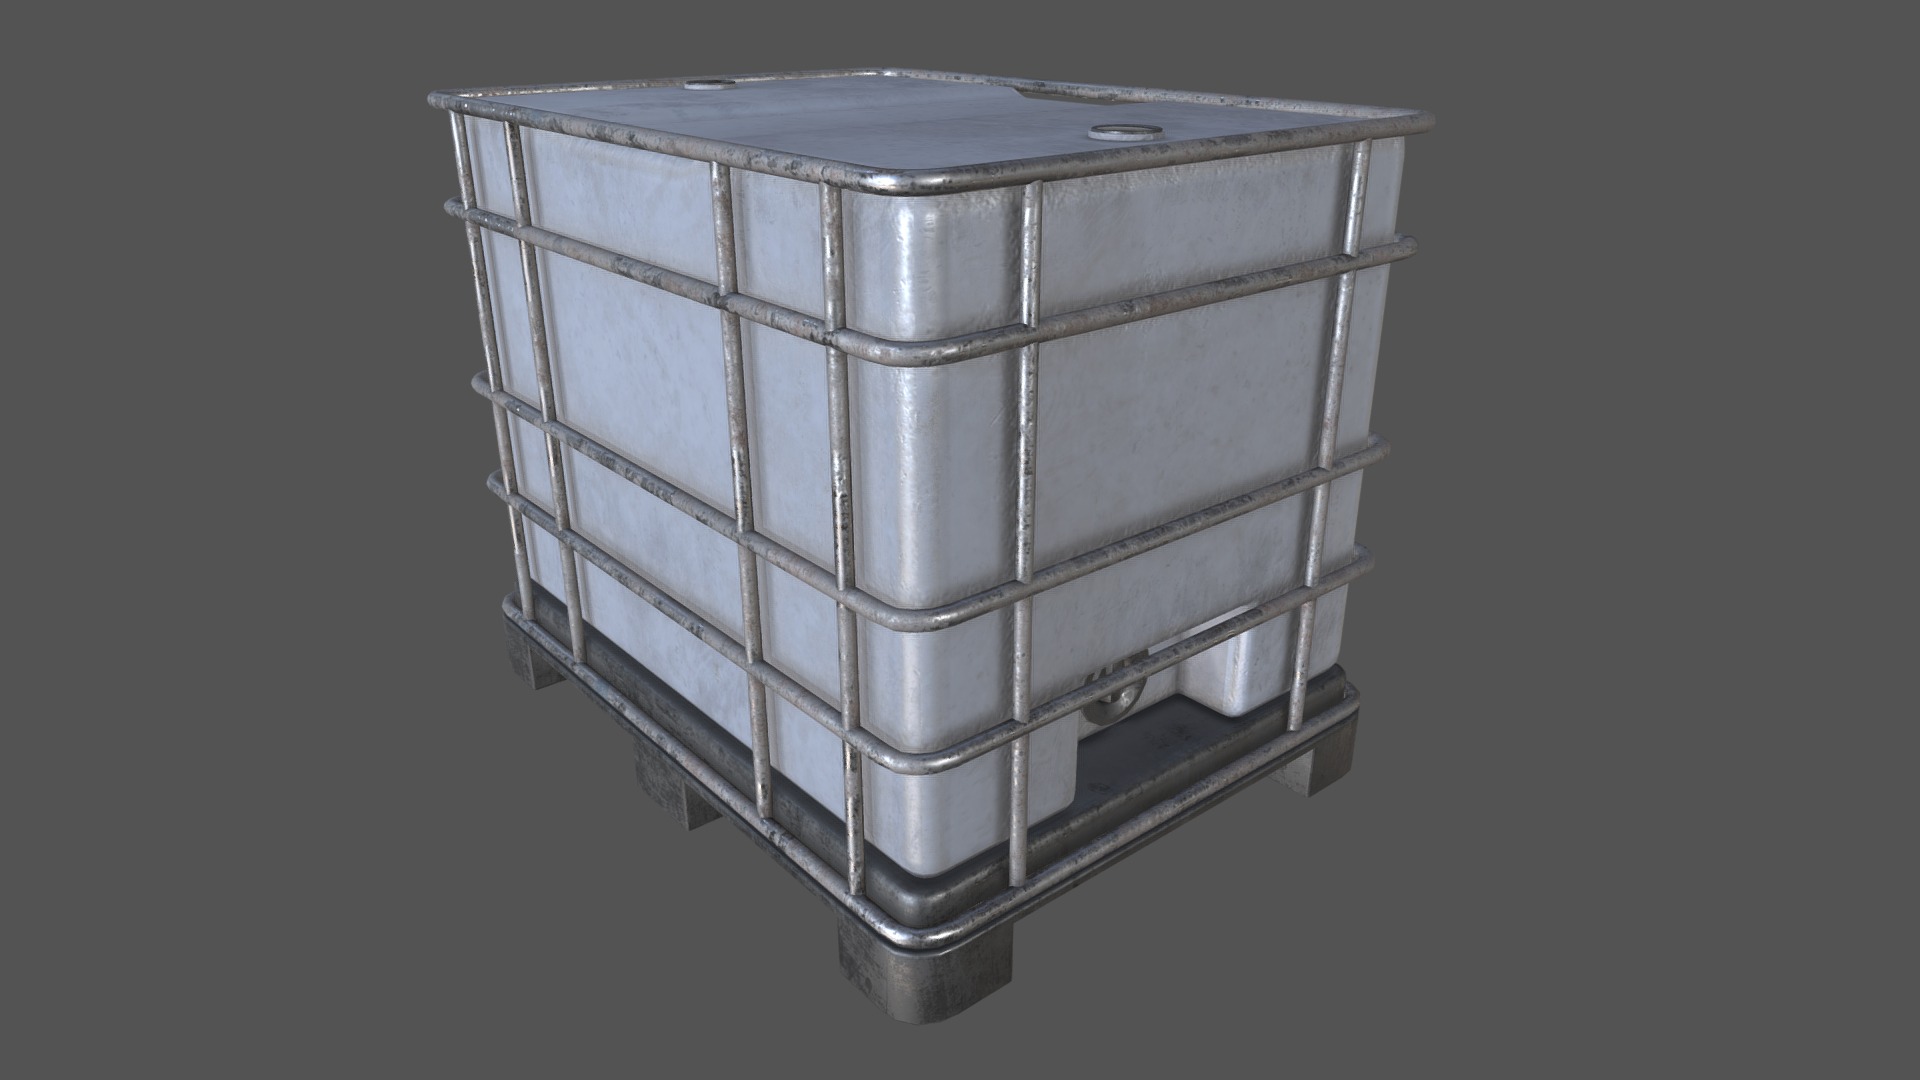 3D model Liquid Container White PBR - This is a 3D model of the Liquid Container White PBR. The 3D model is about a metal box with a metal lid.